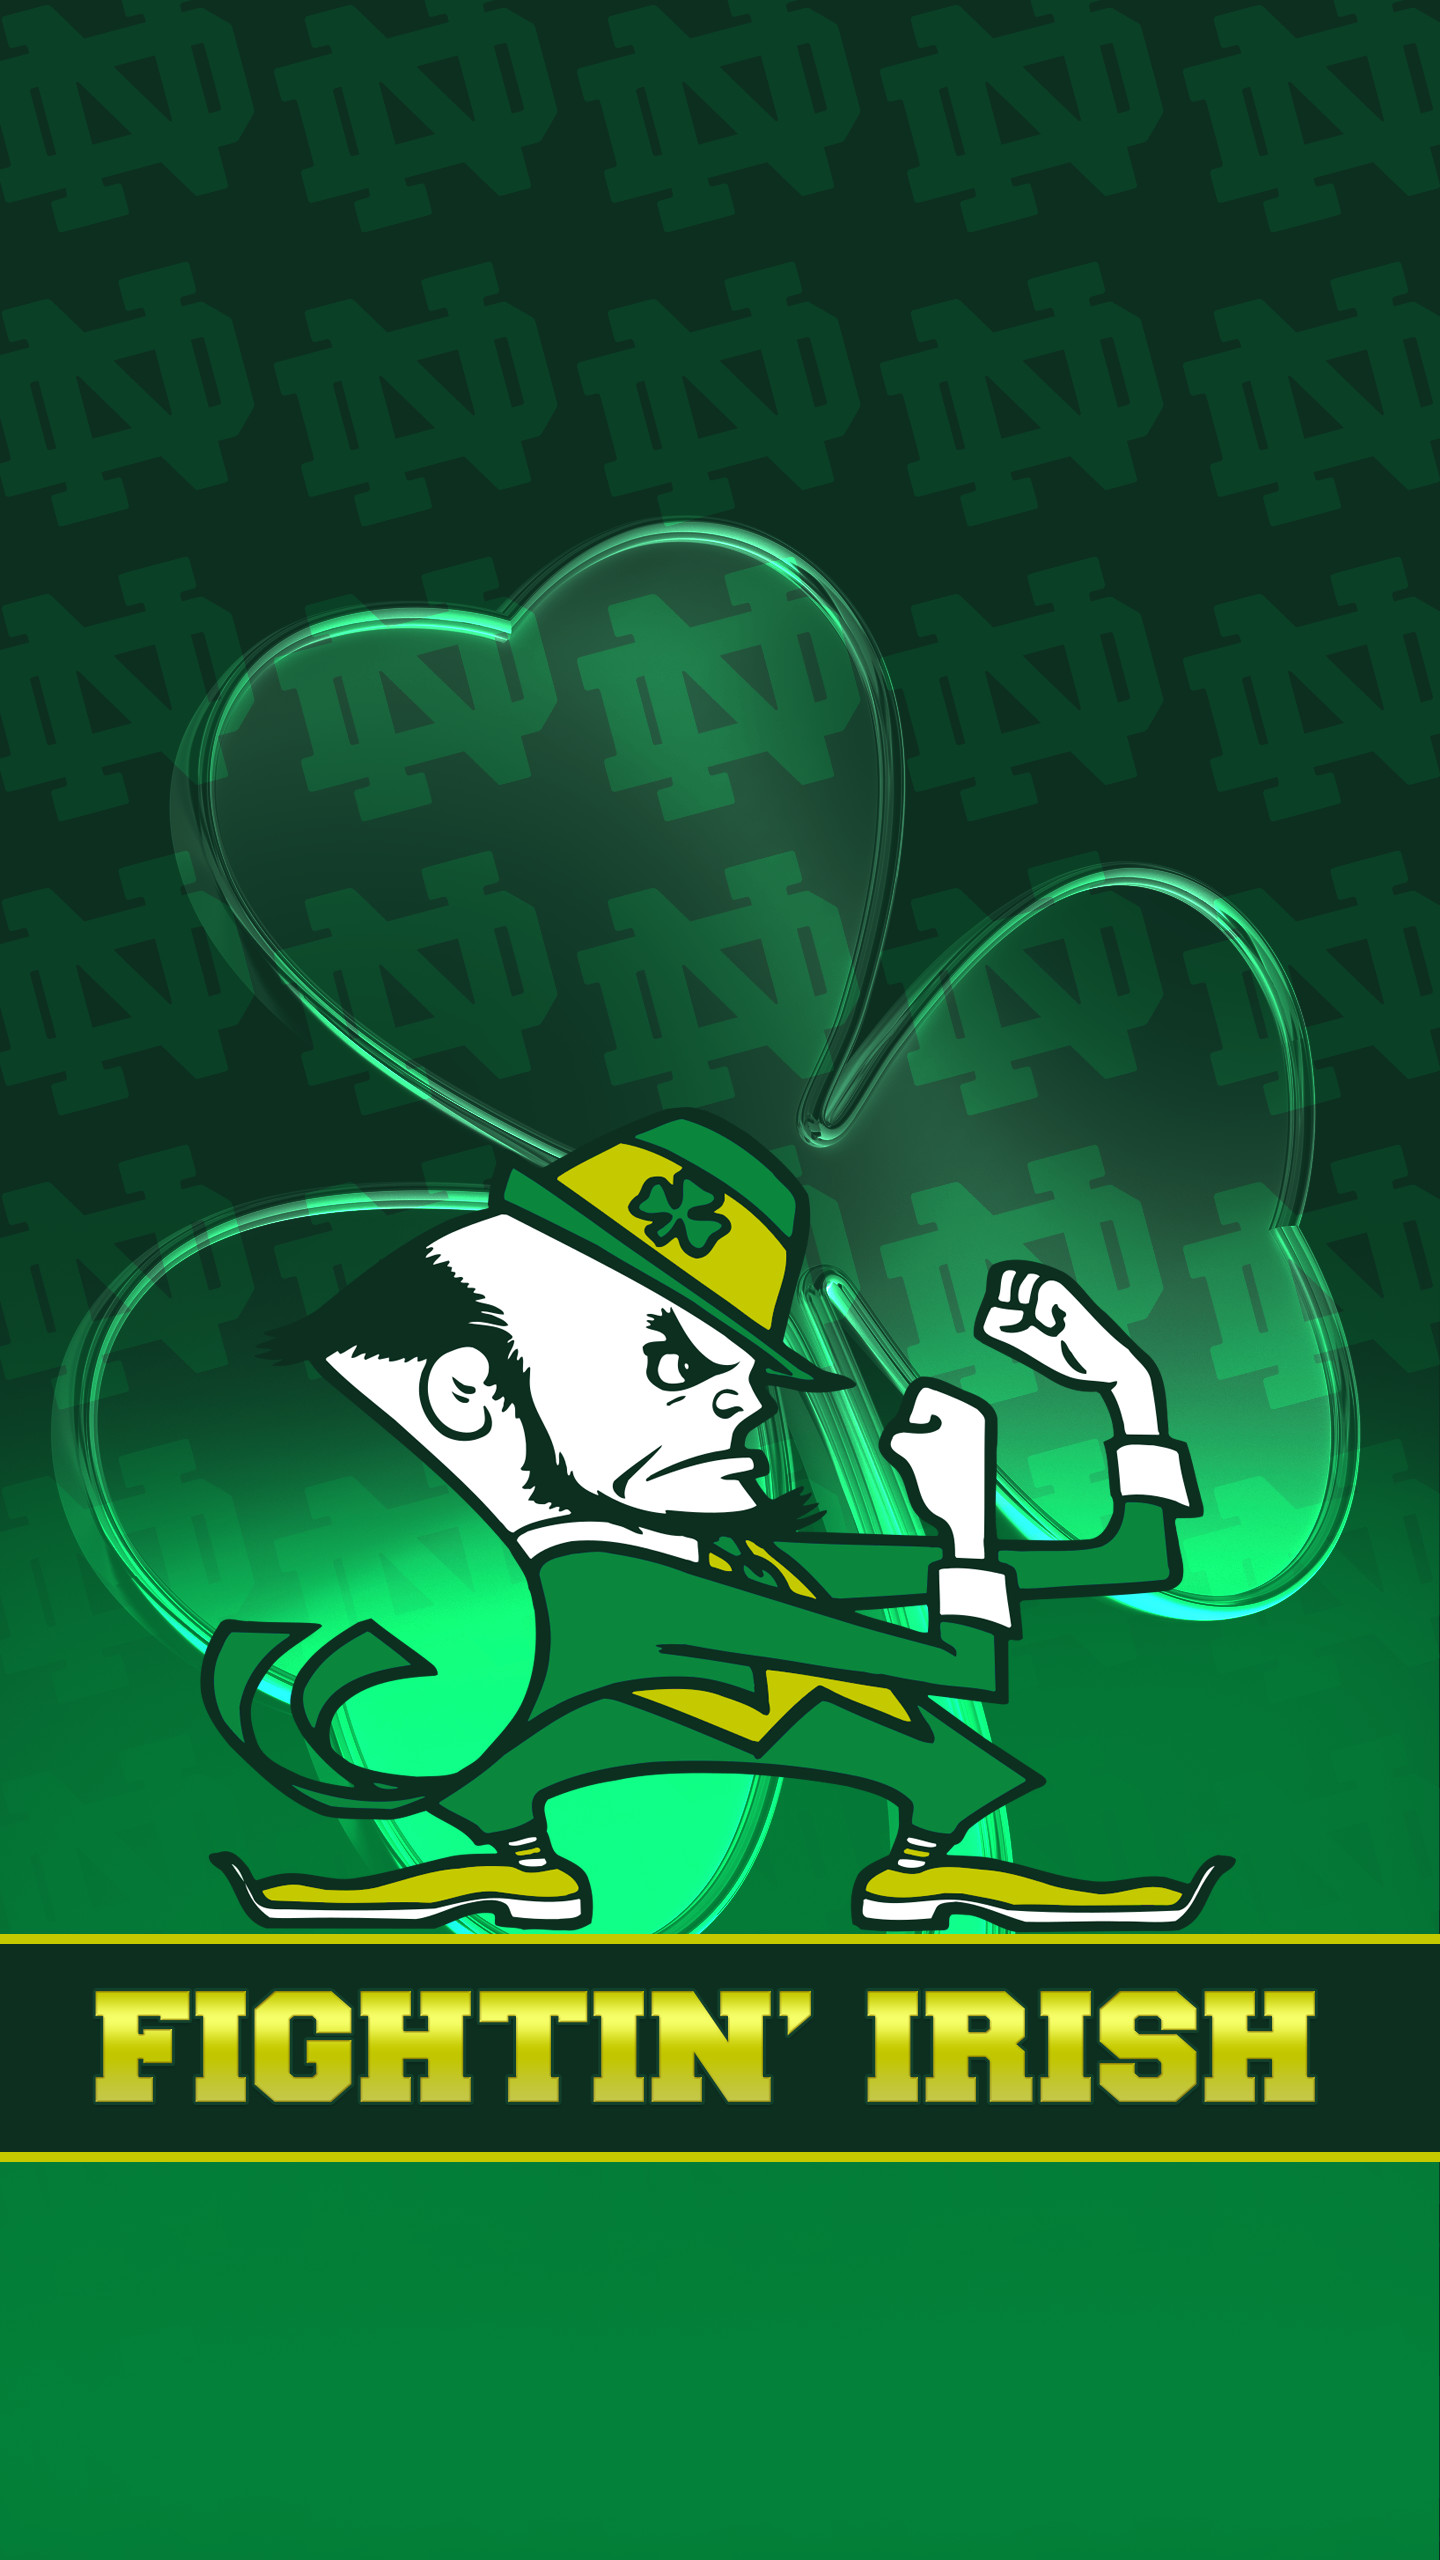 High Resolution Notre Dame Logo Wallpapers